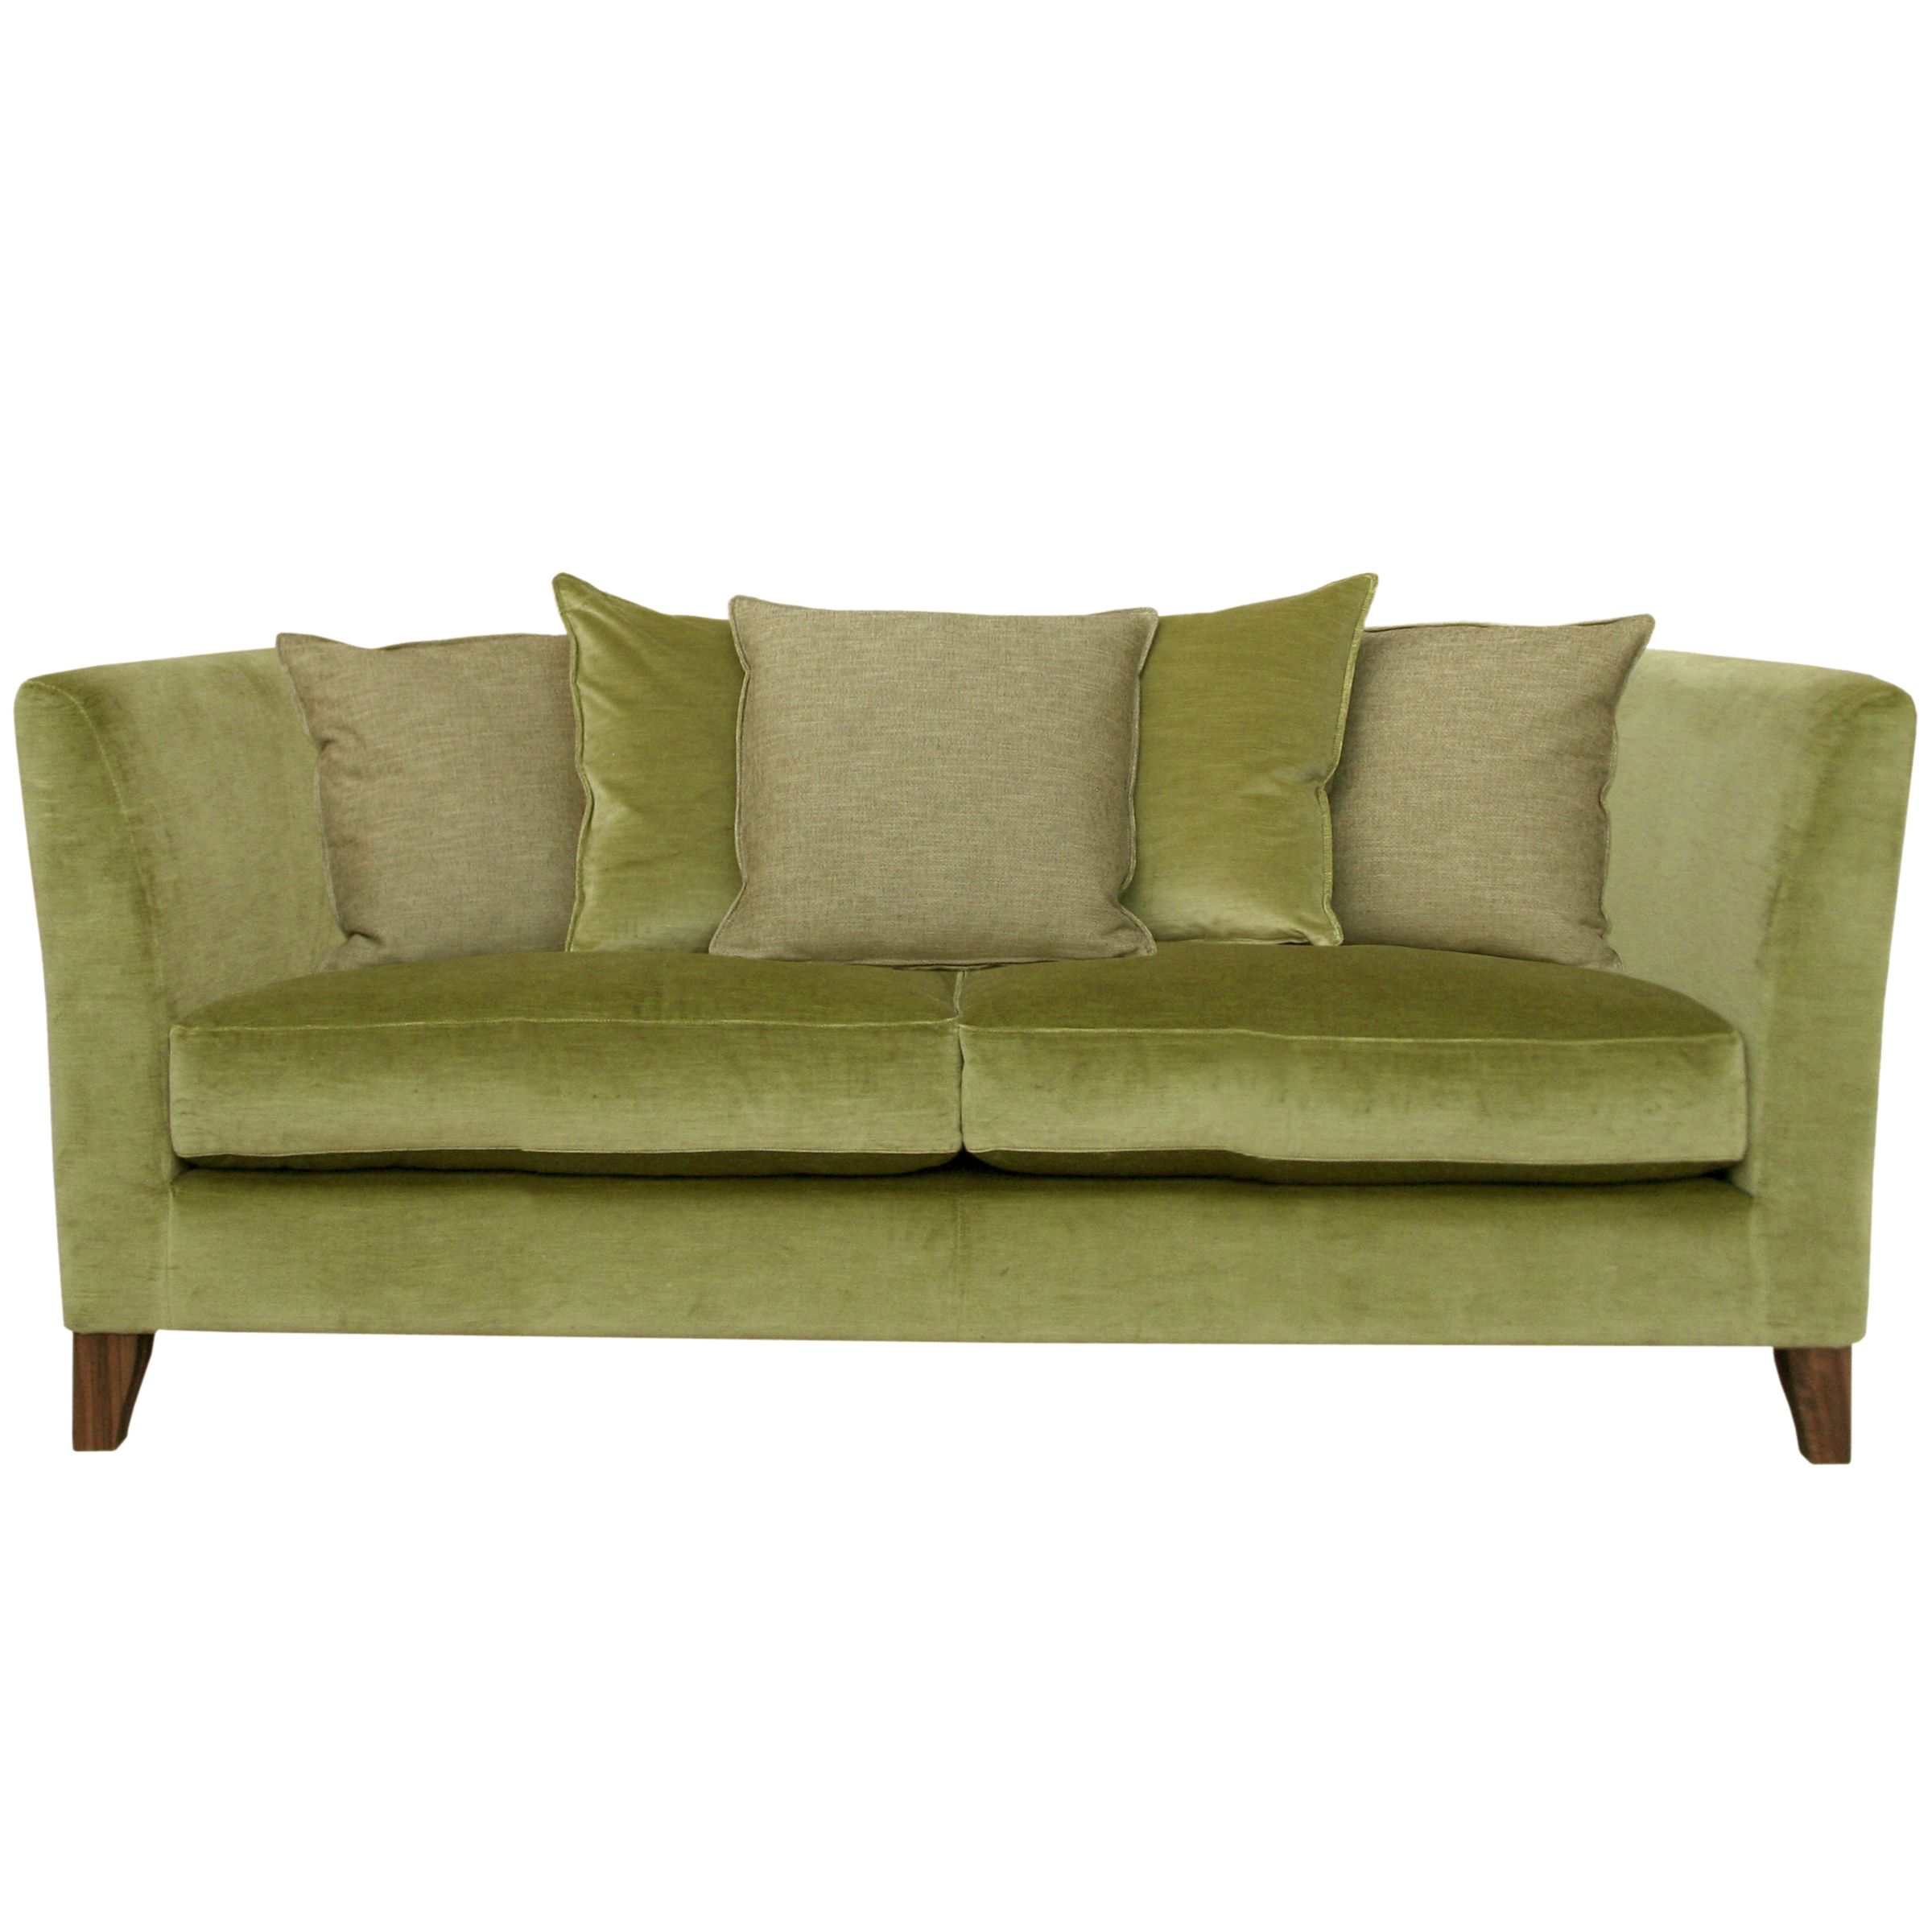 Nick Munro Collection Scatter Back Large Sofa,